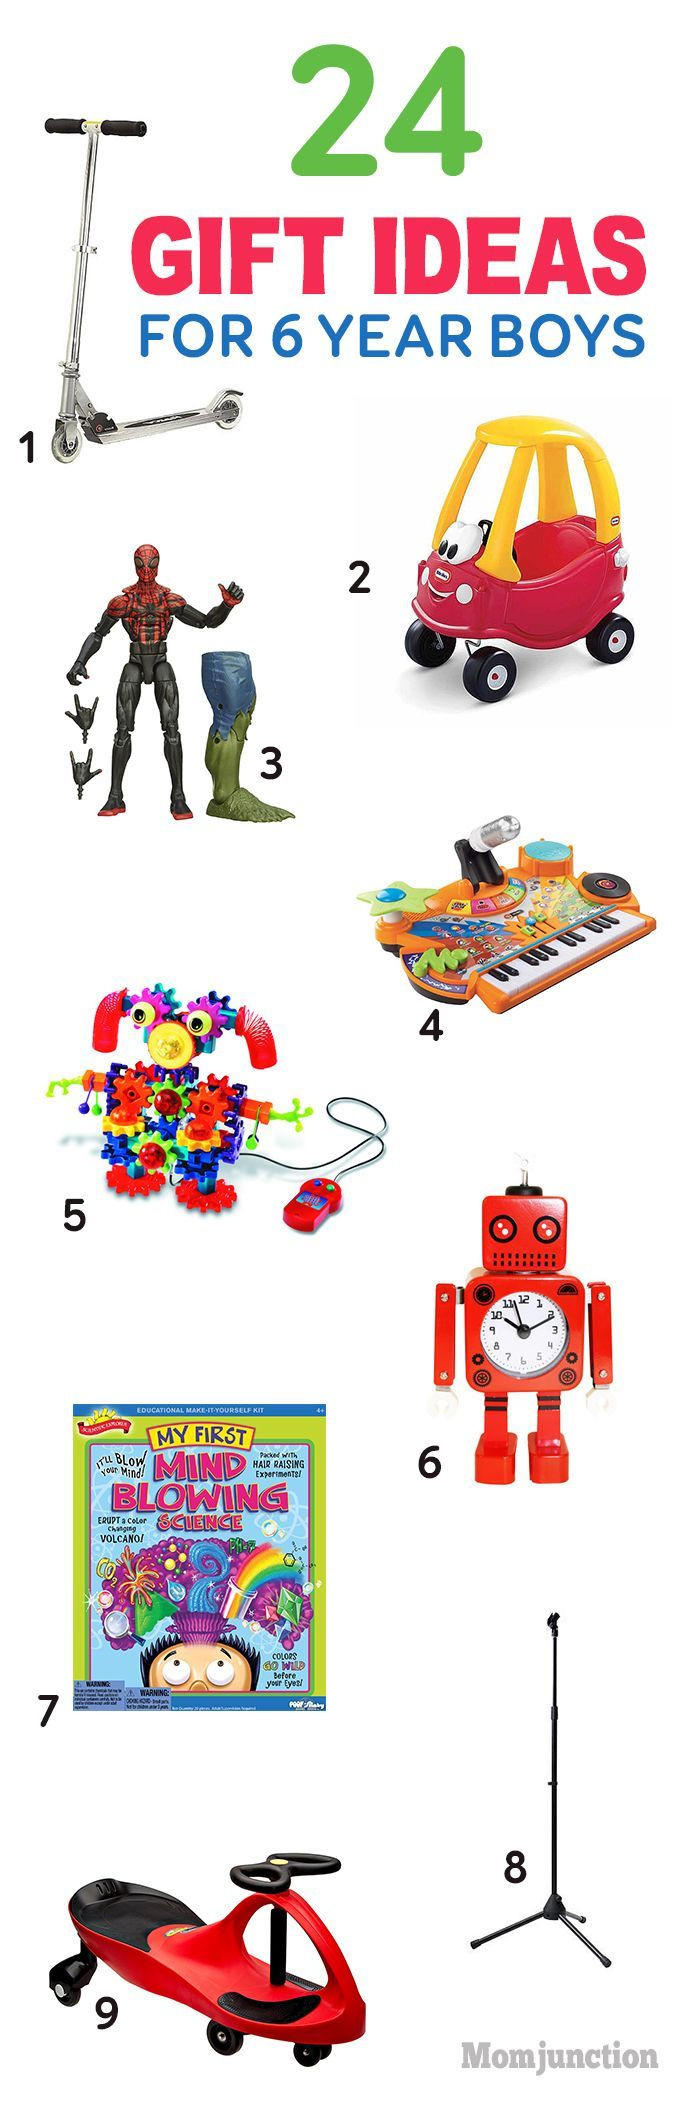 Six Year Old Boy Birthday Gift Ideas
 17 Best images about Toys for 7 year old boy on Pinterest